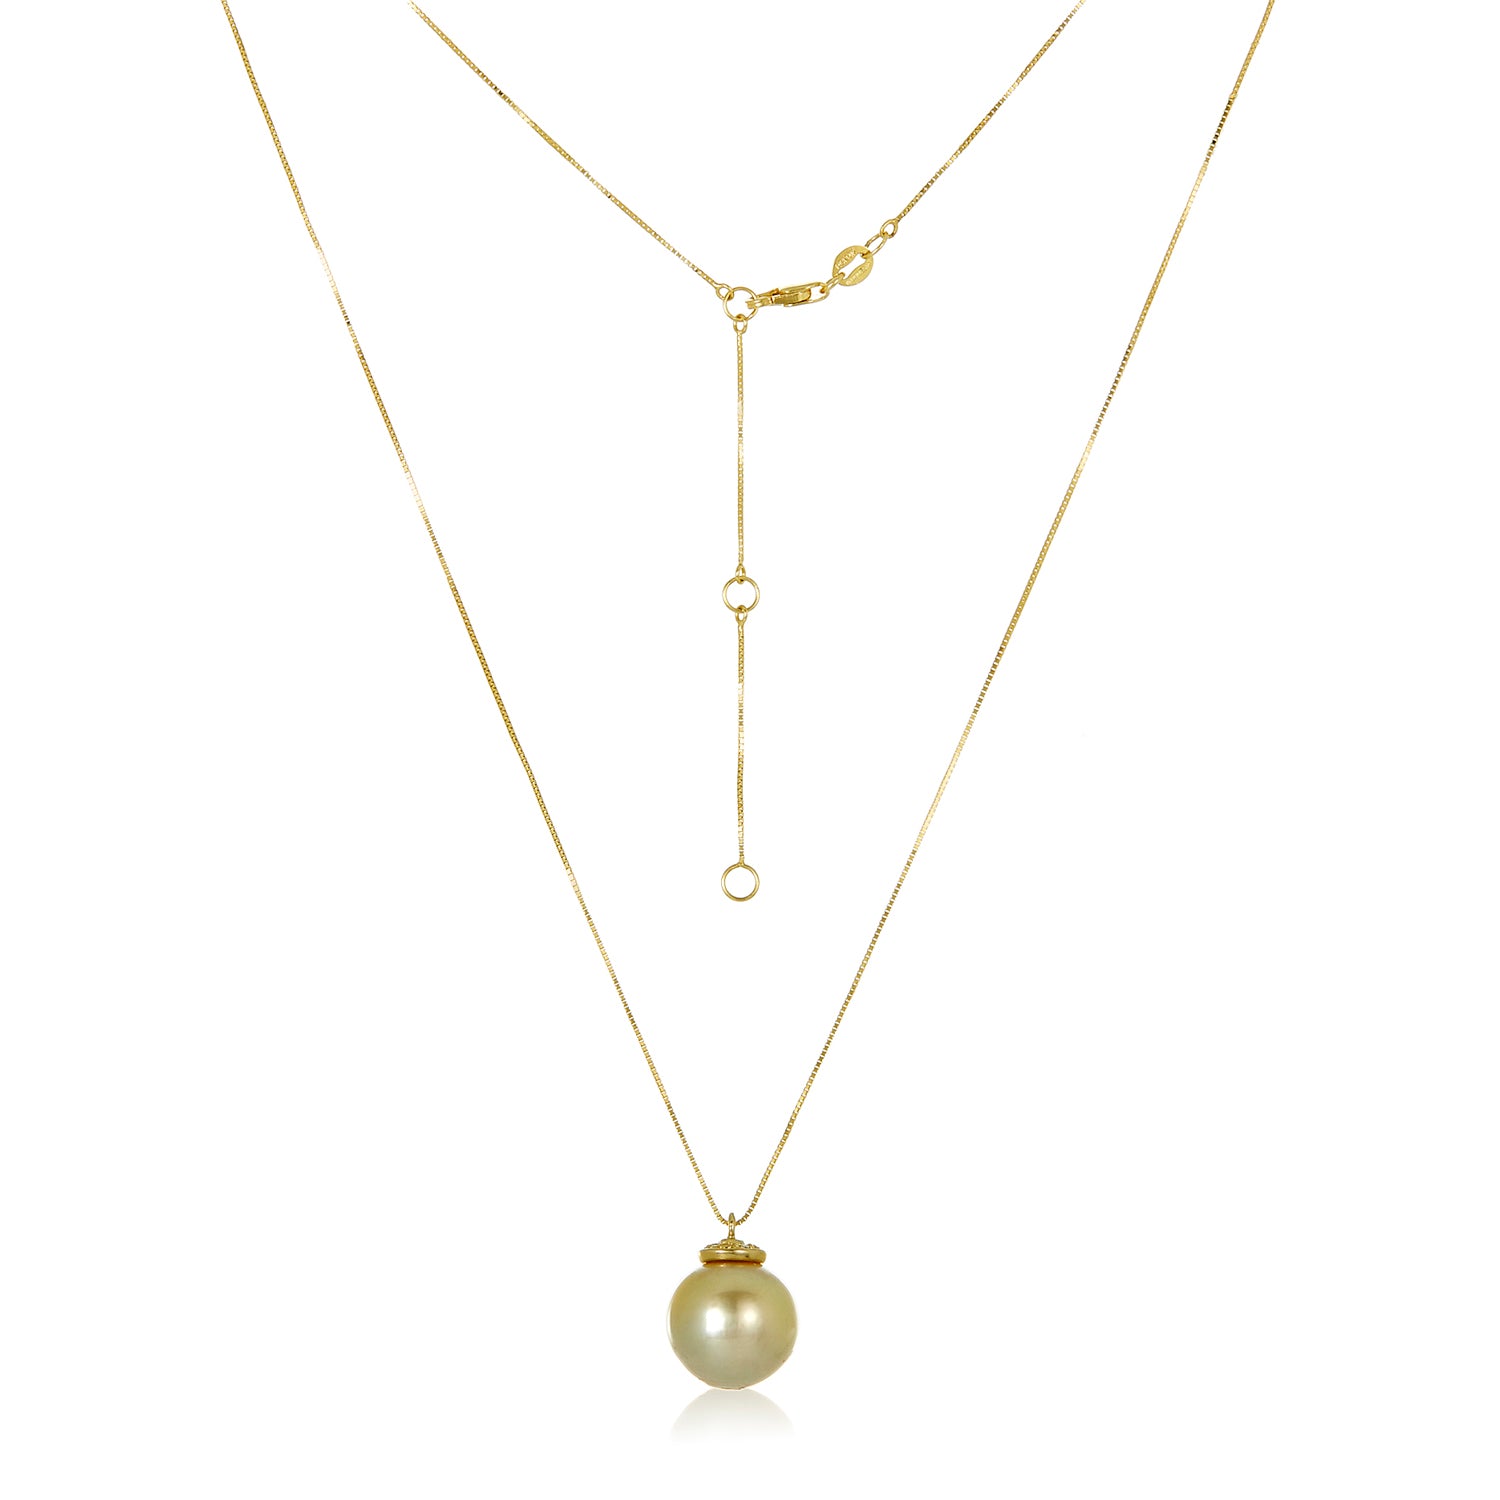 Yellow South Sea Pearl Pendant Necklace in 14k